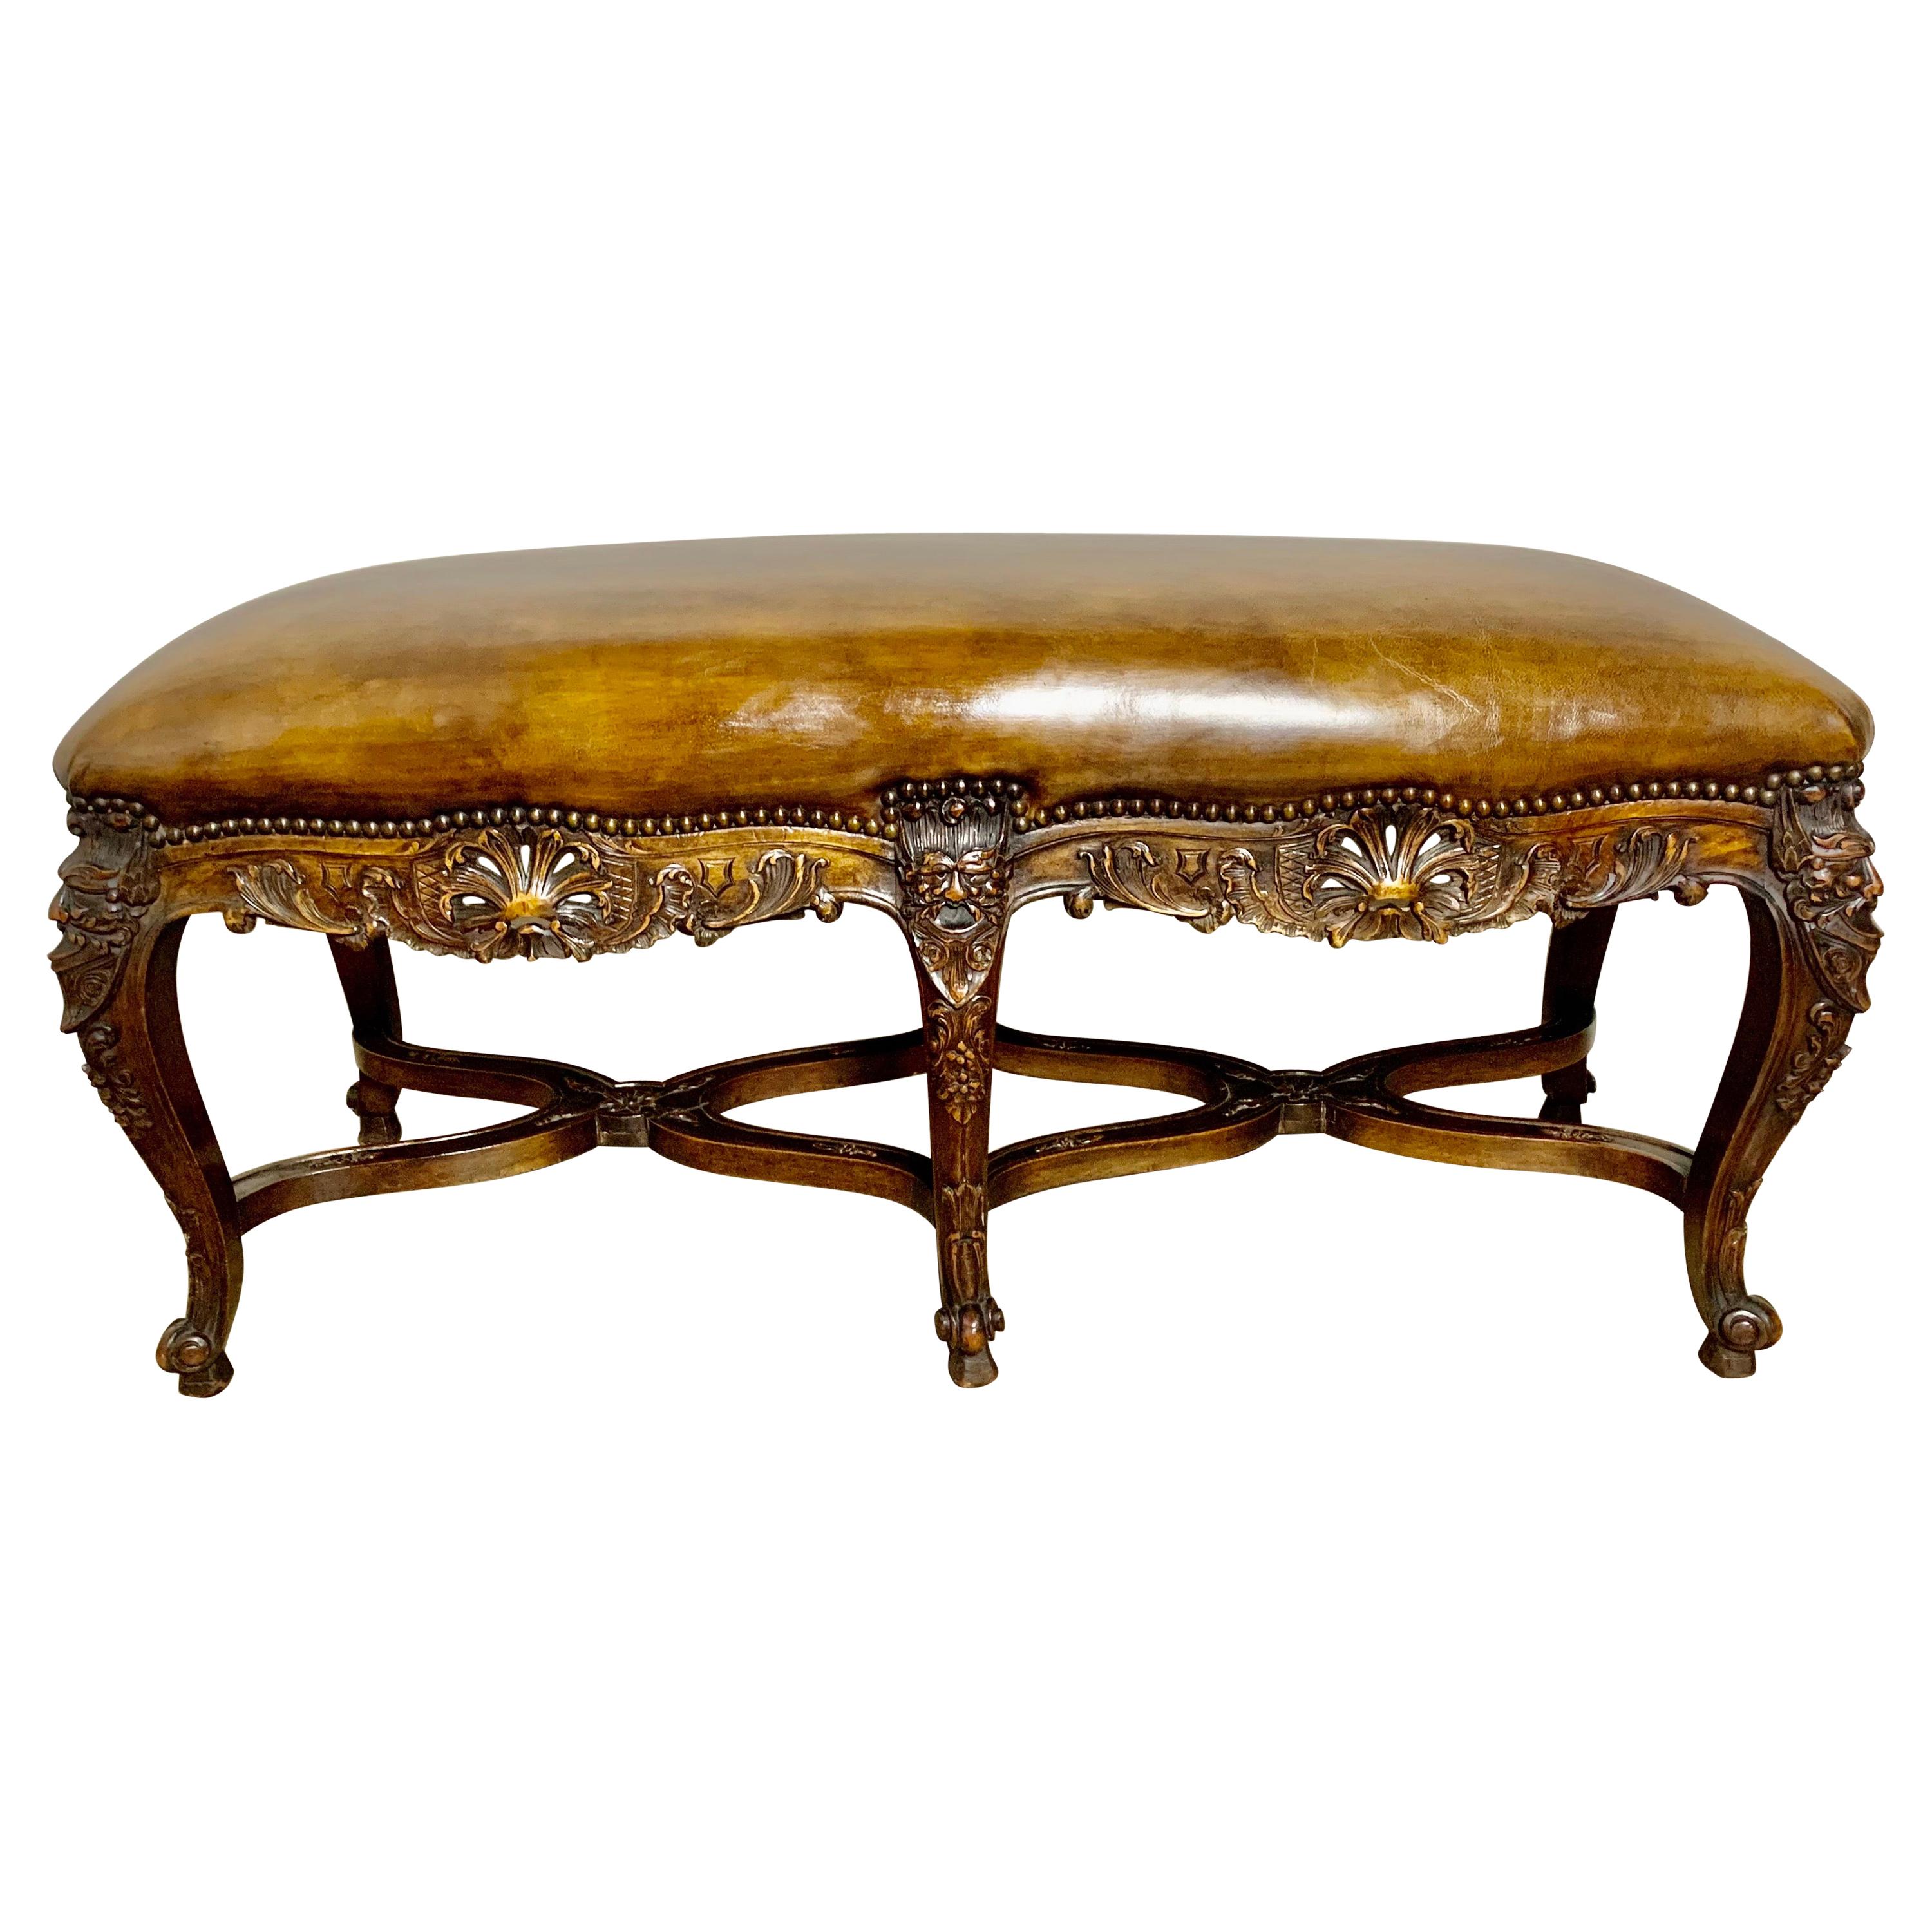 Six Legged French Carved Leather Bench C. 1900's